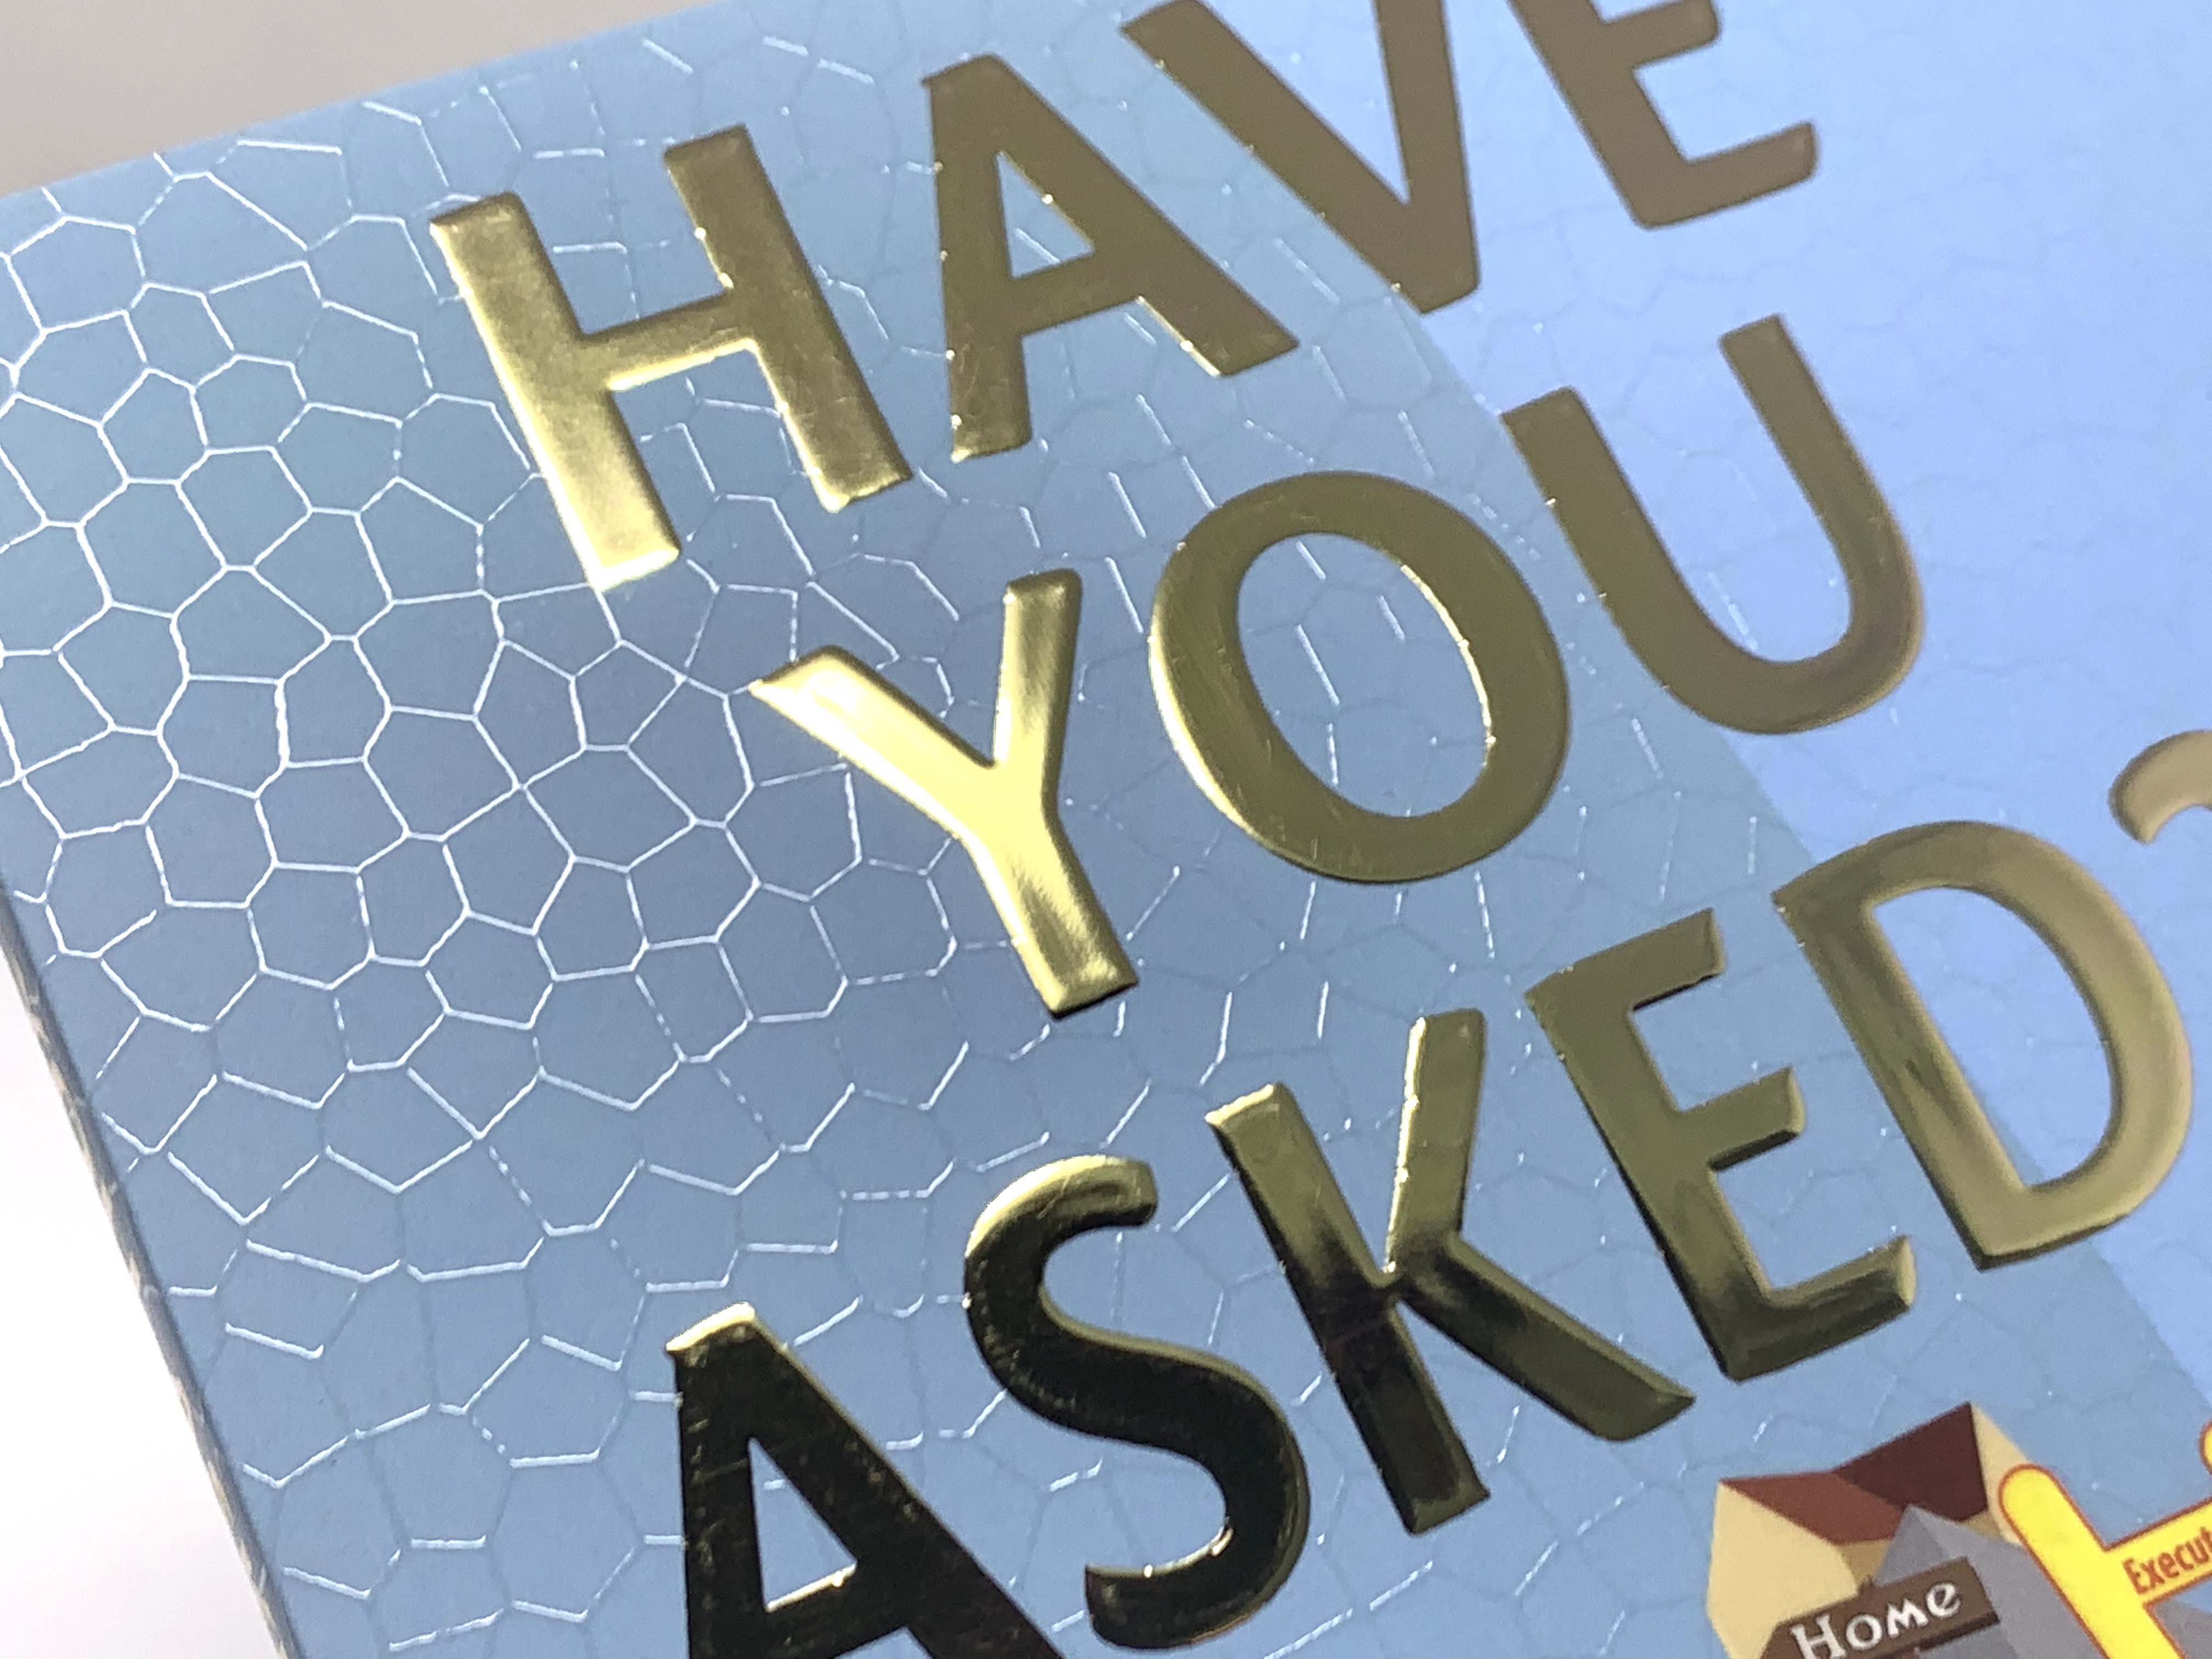 "Have You Asked?" book cover